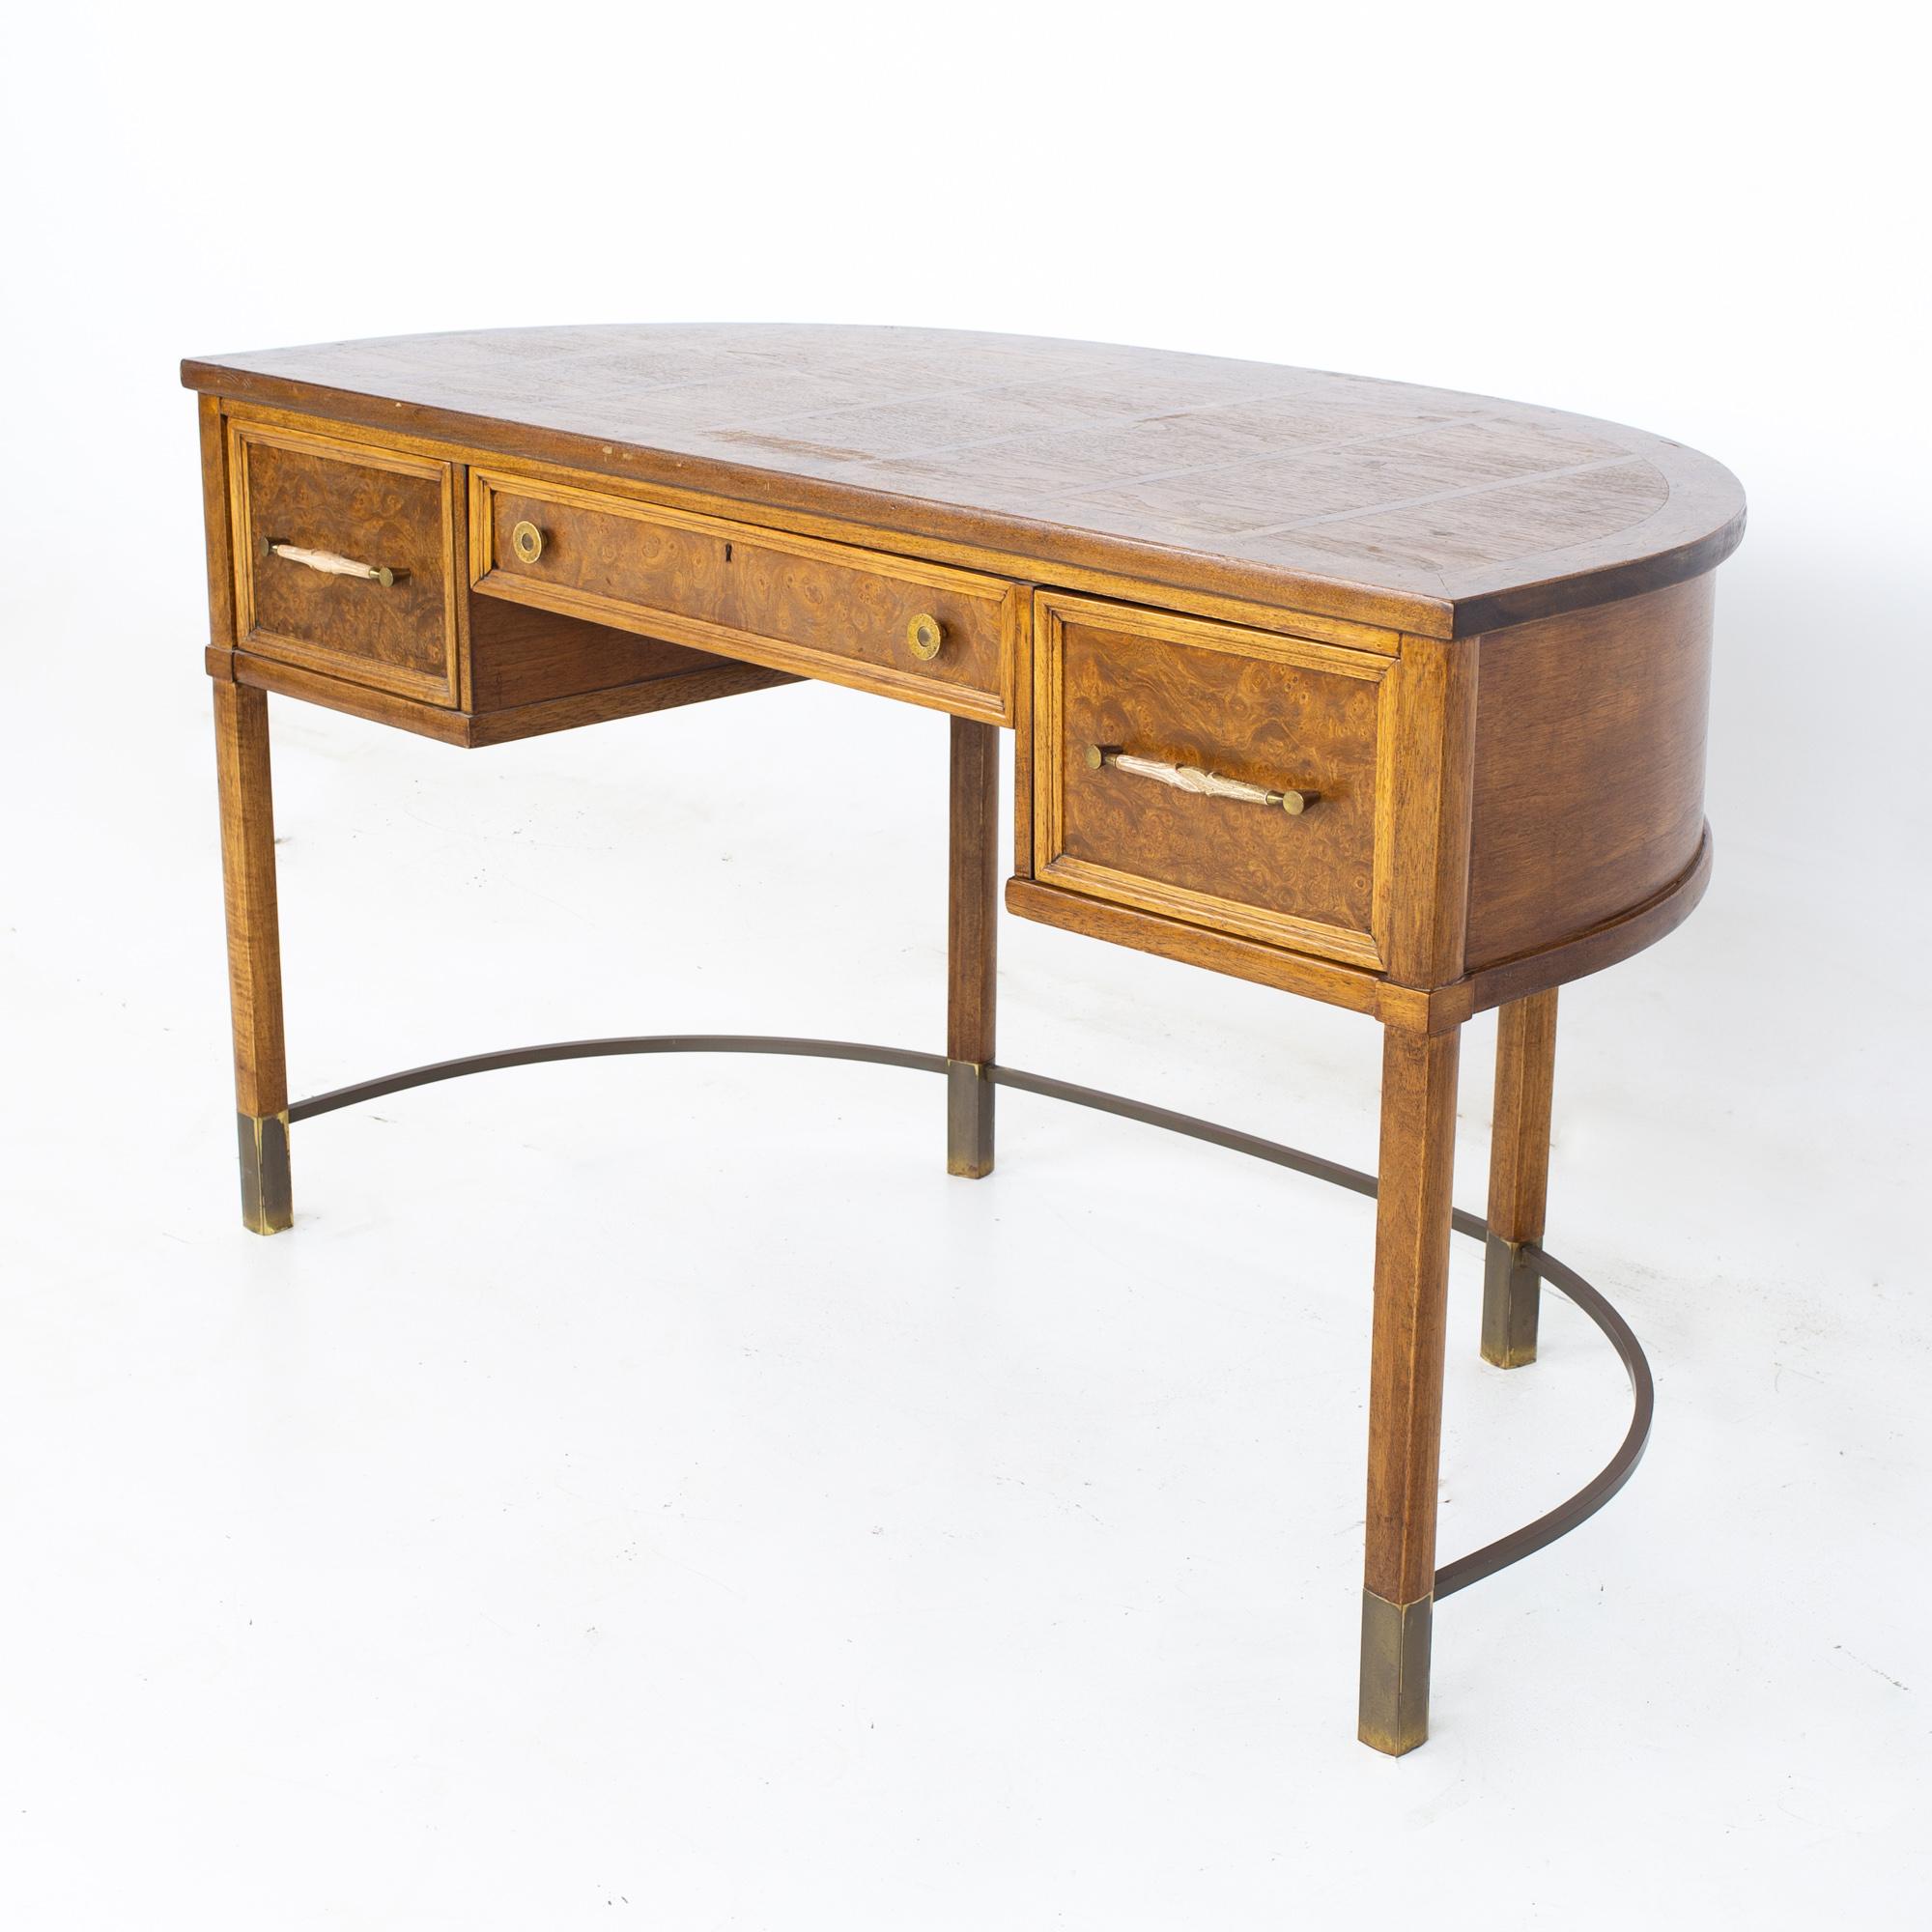 Mastercraft style mid century desk
Desk measures: 50 wide x 24 deep x 29 inches high 

All pieces of furniture can be had in what we call restored vintage condition. That means the piece is restored upon purchase so it’s free of watermarks, chips